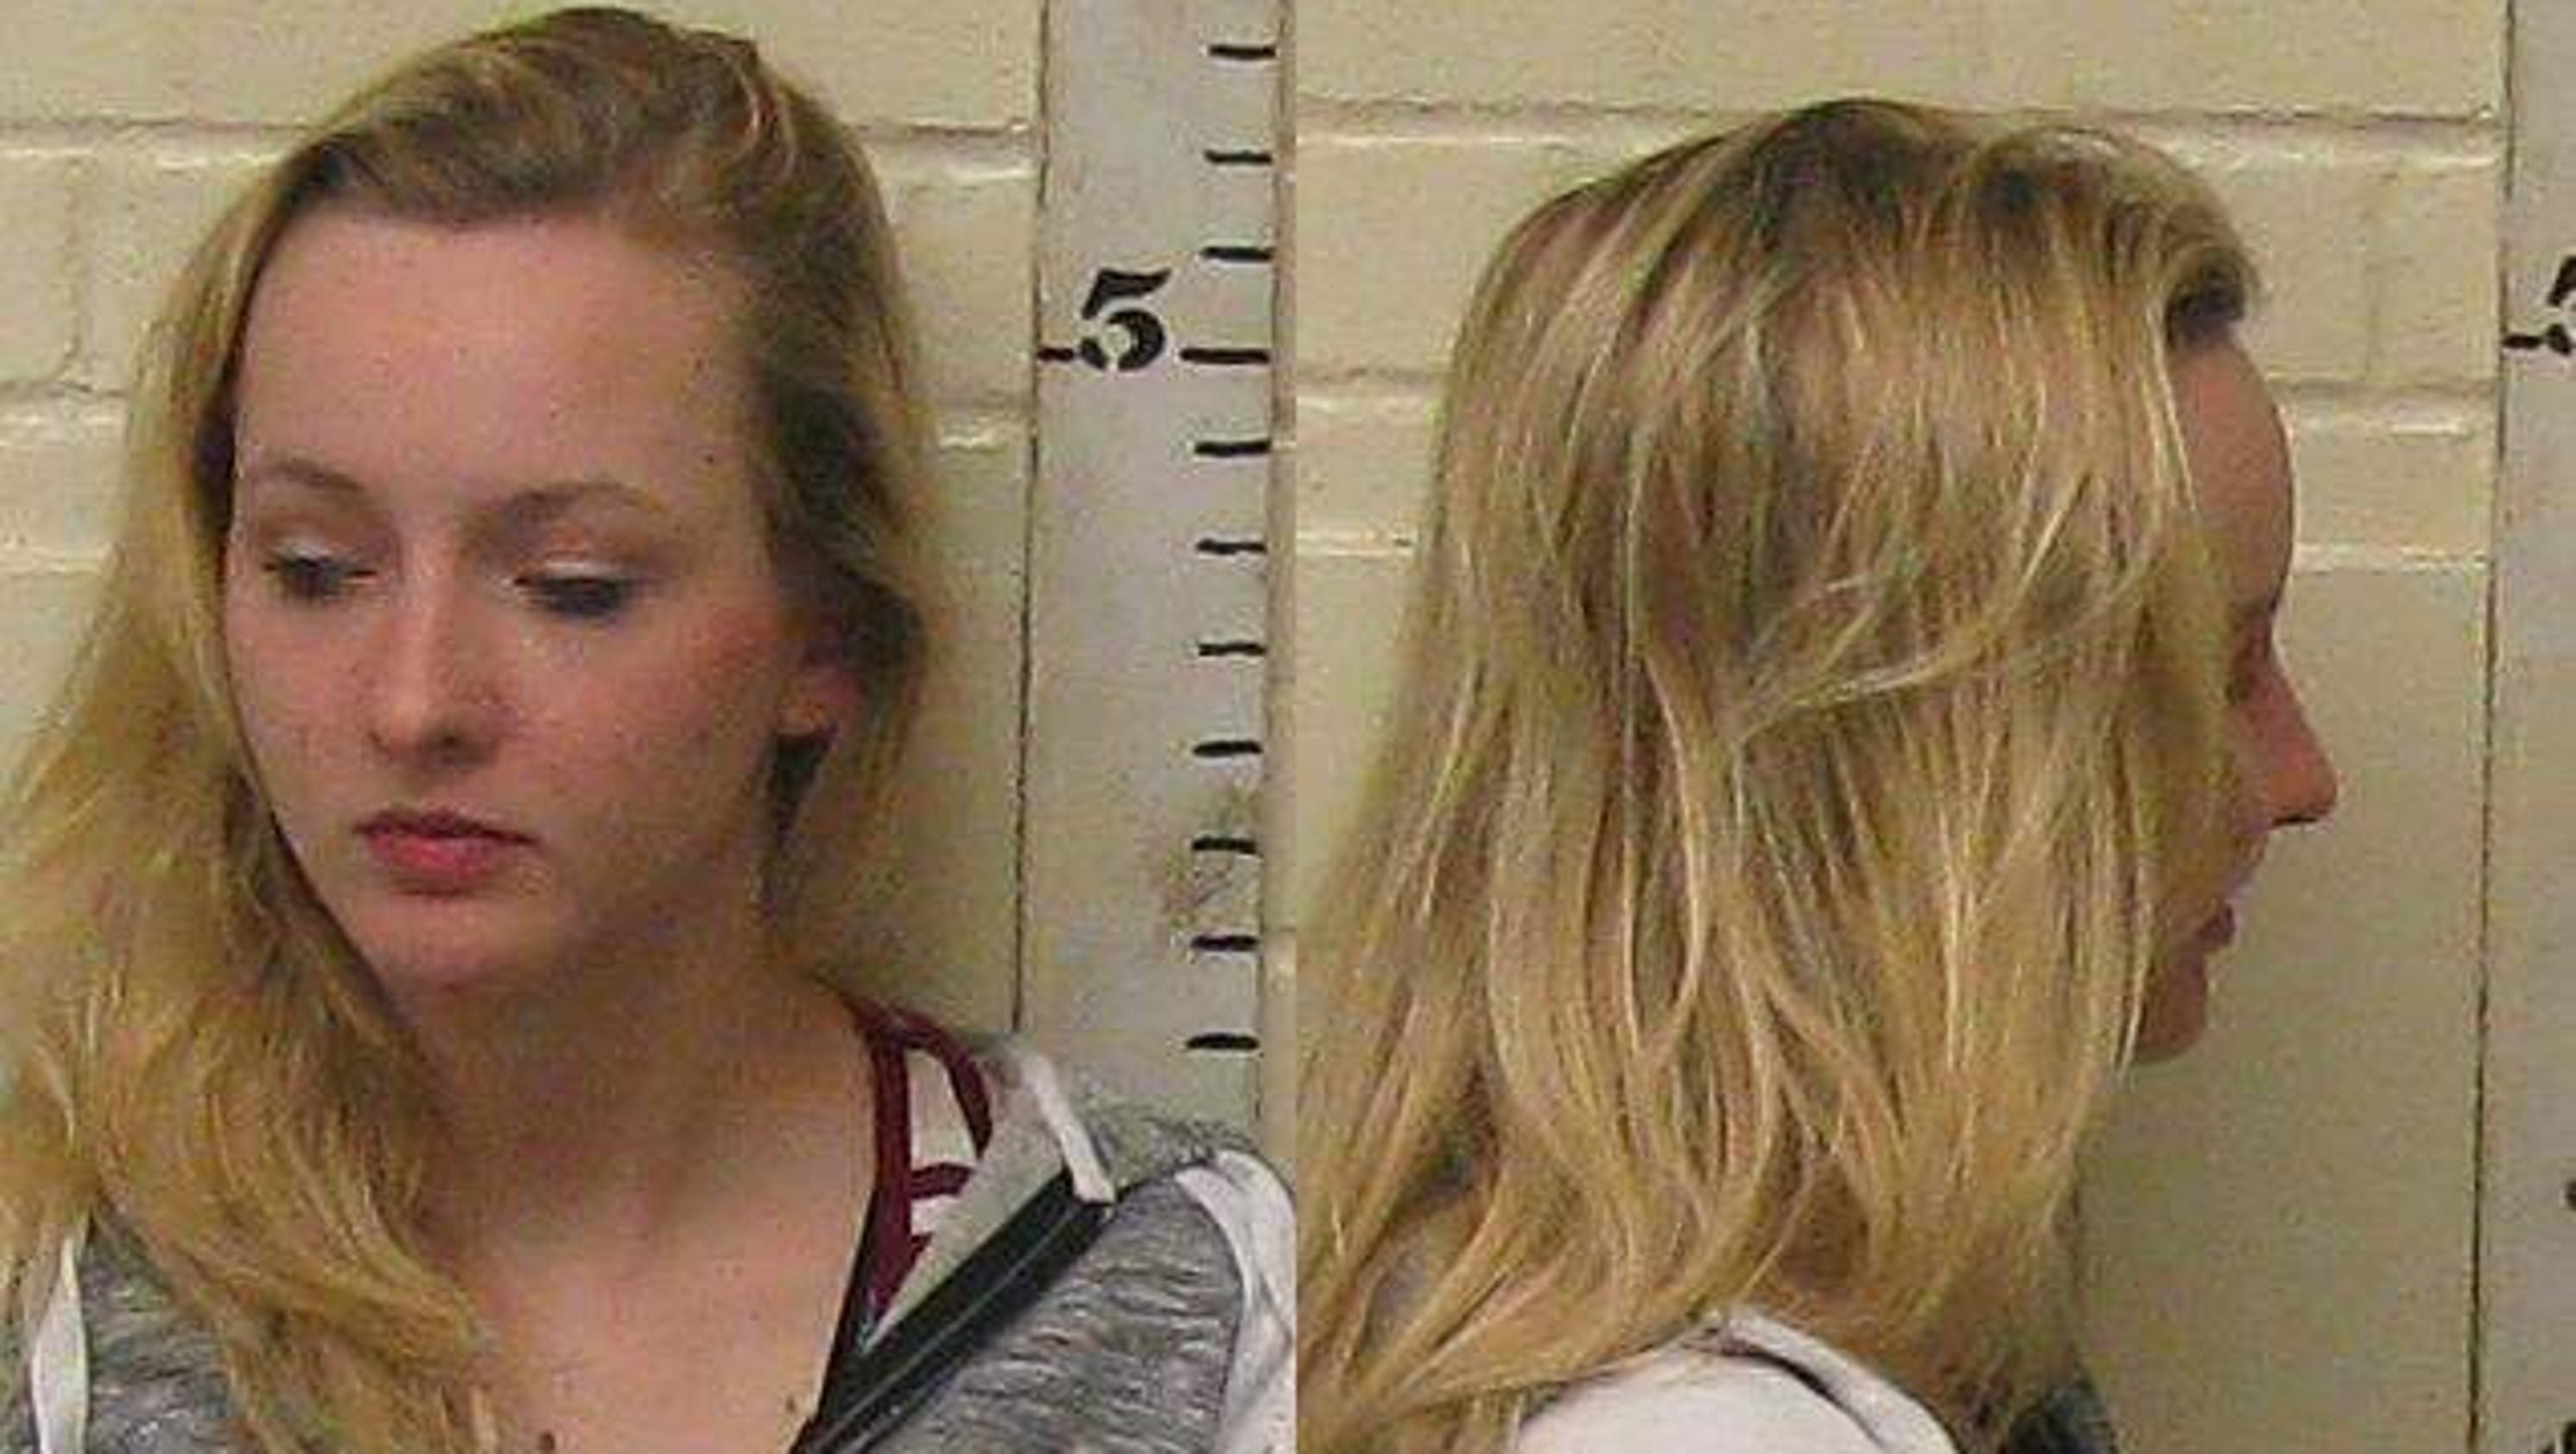 Texas teen who claimed she was raped admits it was a hoax picture photo